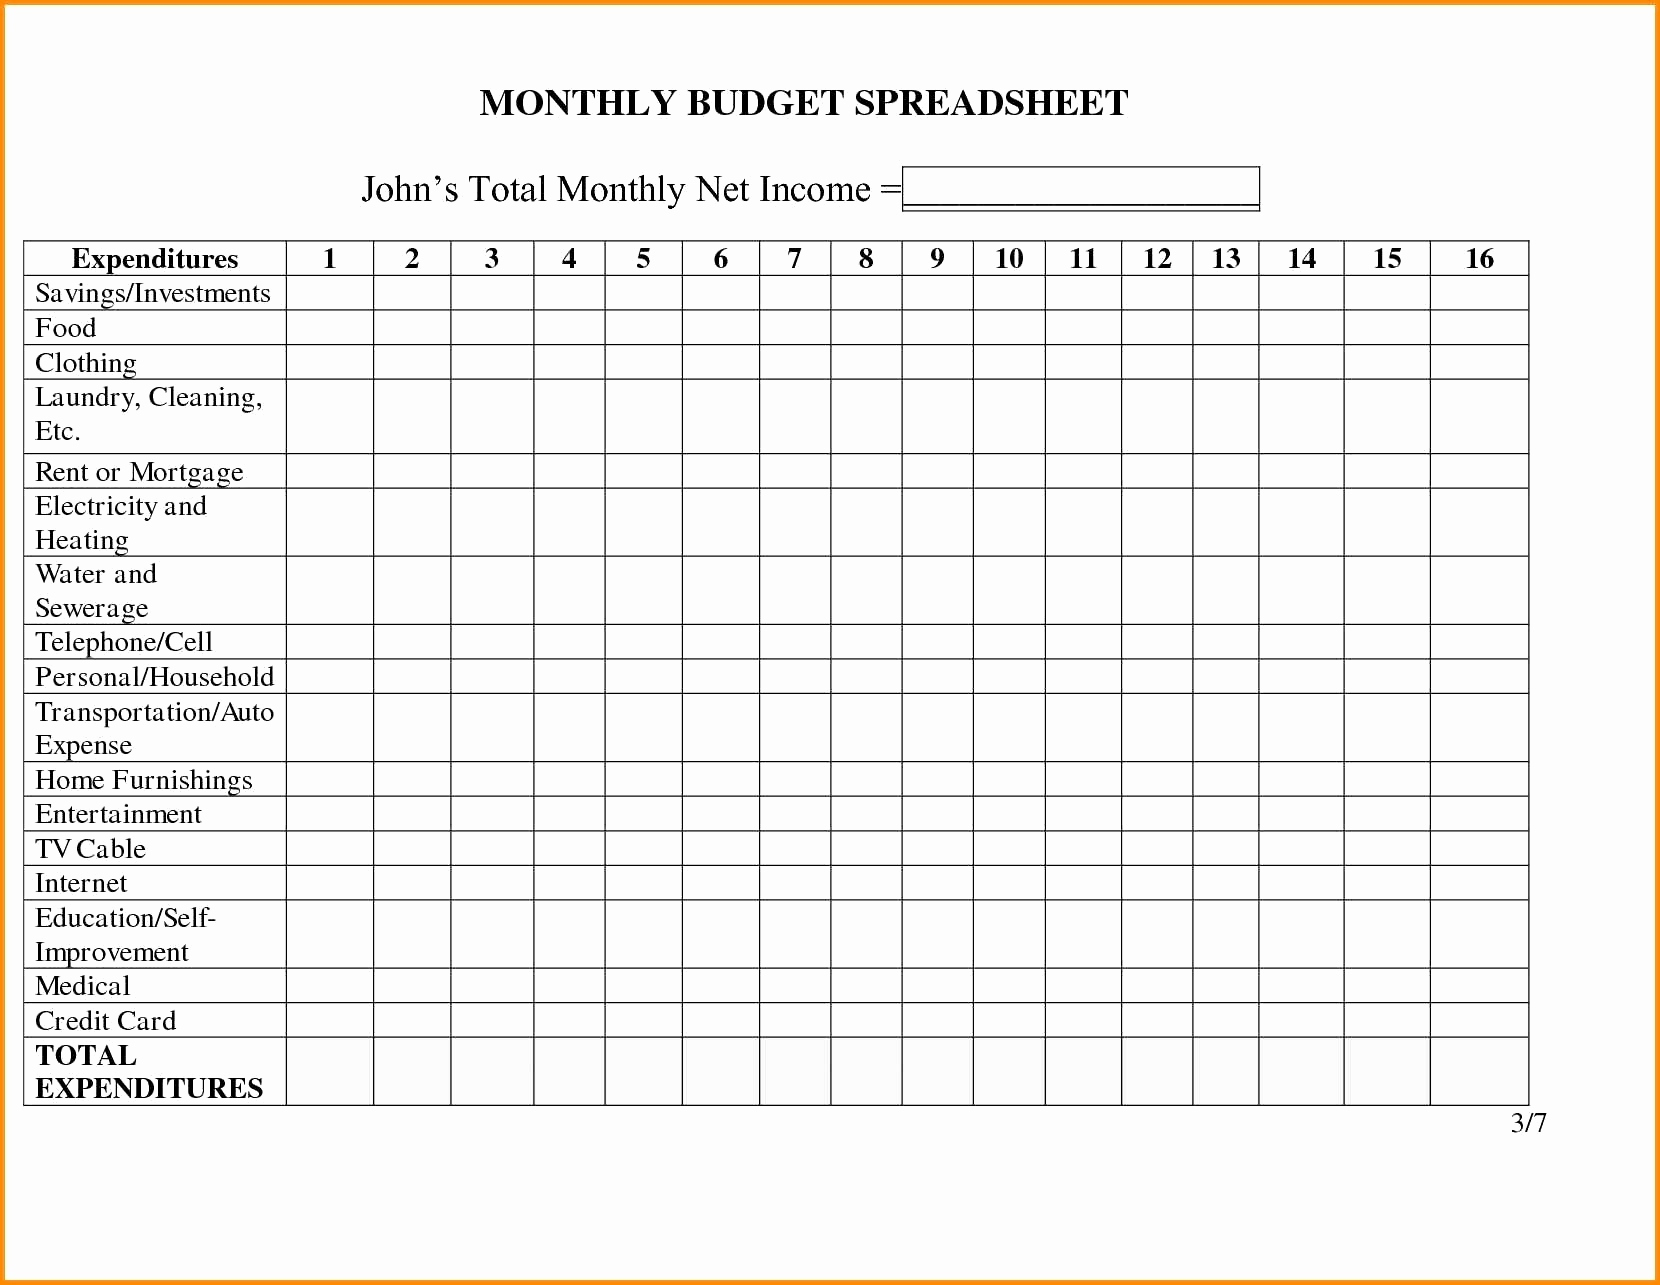 Monthly Outgoings Spreadsheet For Realtor Expenseracking Spreadsheet For Business Monthly Expenses